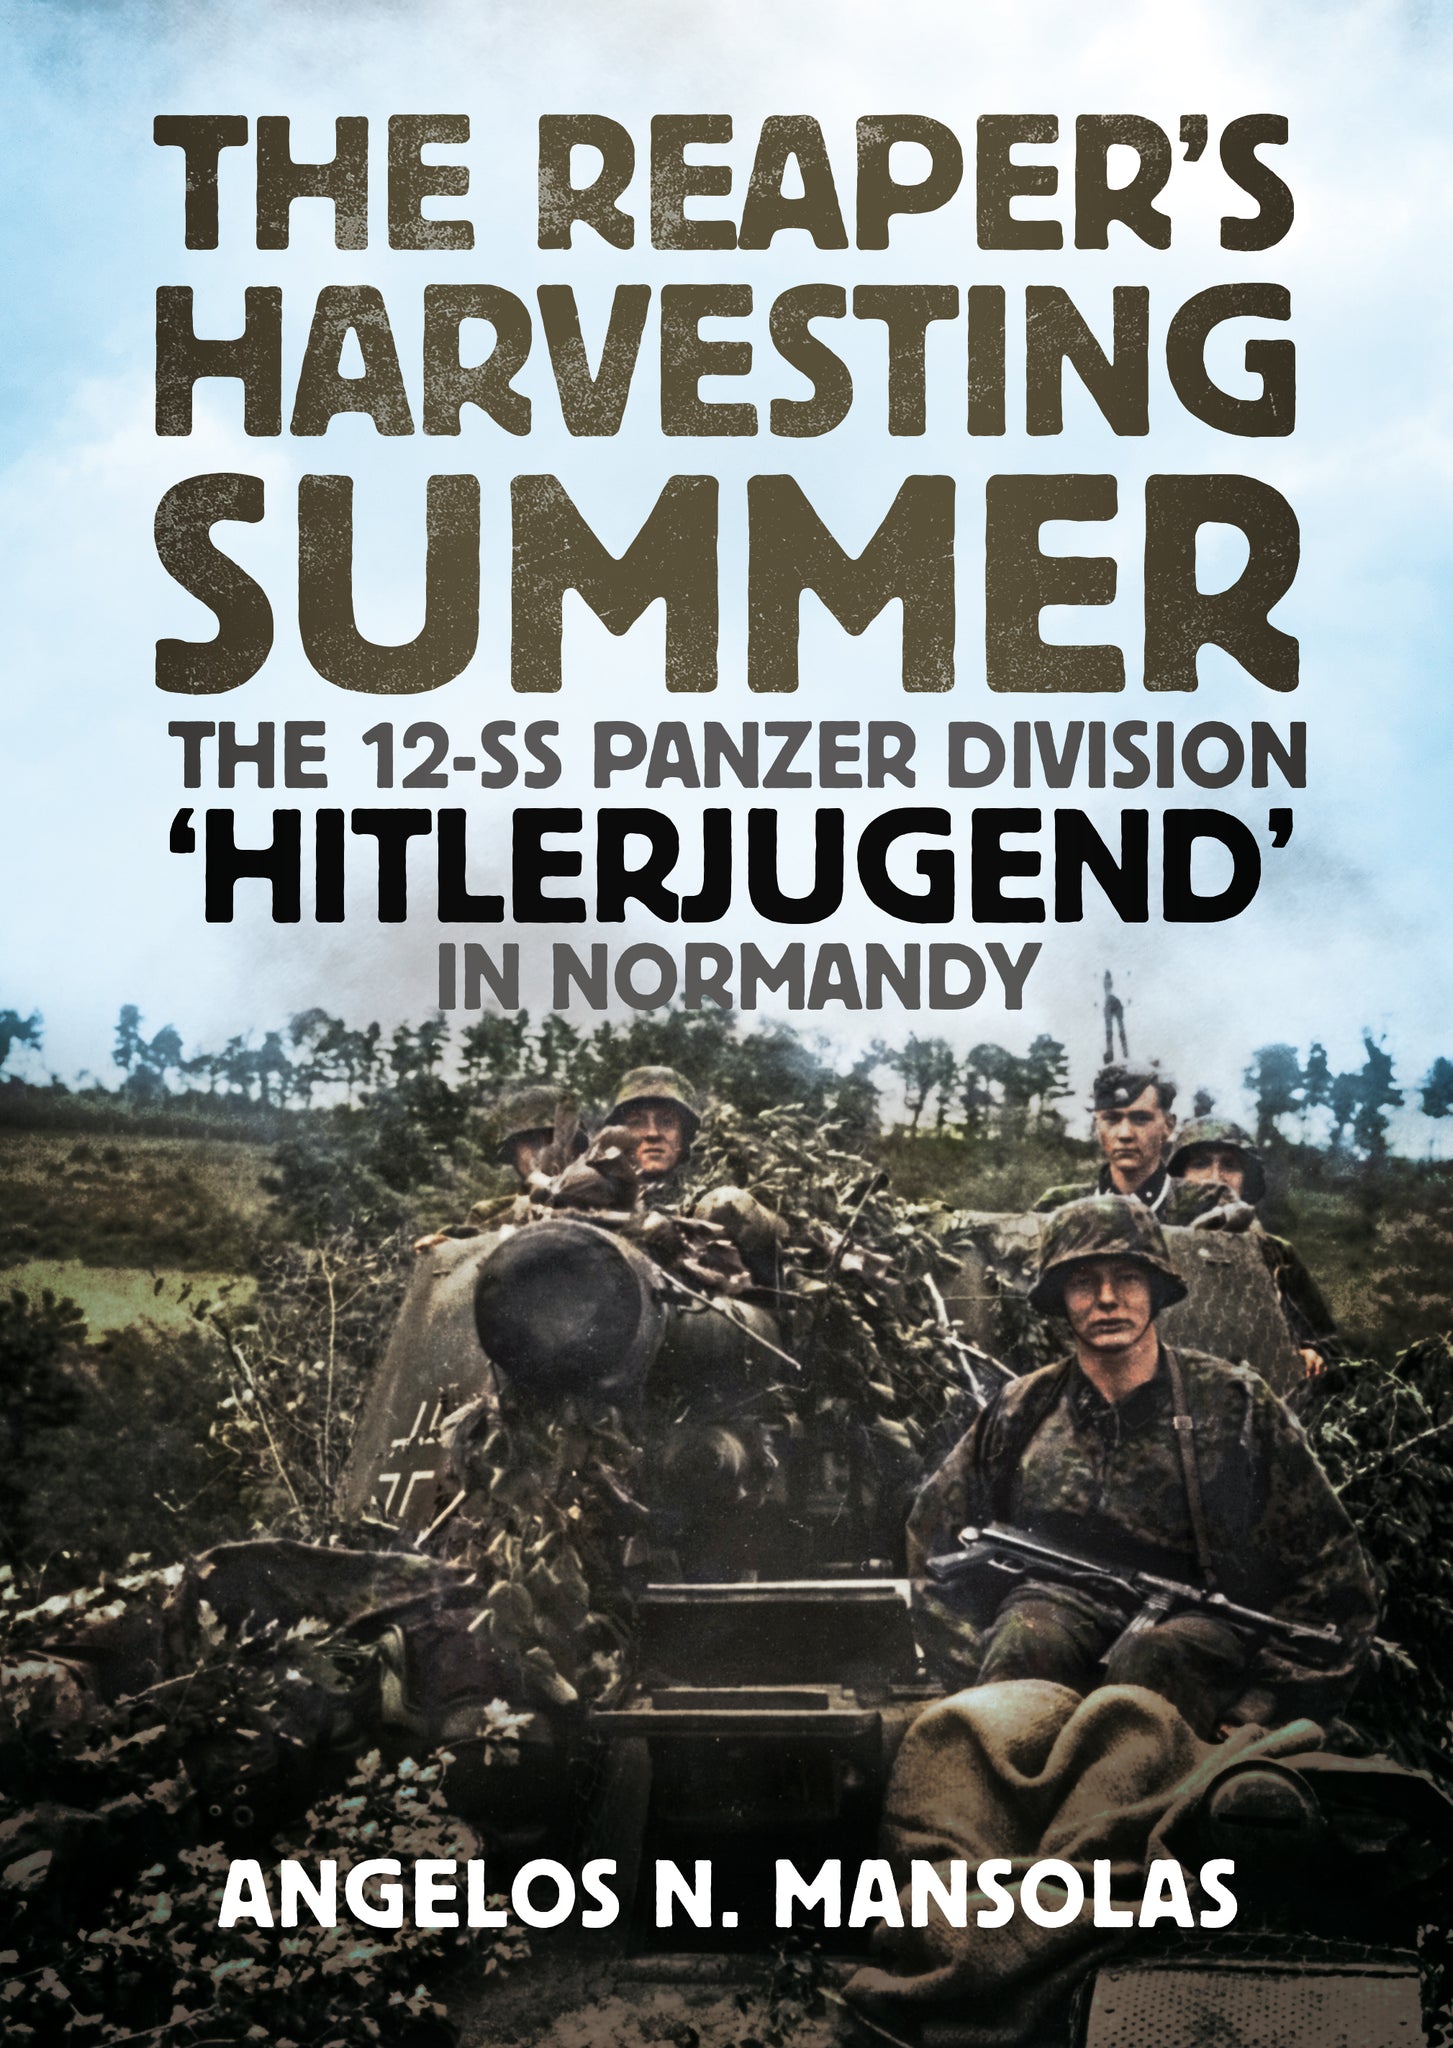 The Reaper’s Harvesting Summer: The 12-SS Panzer Division ‘Hitlerjugend’ in Normandy